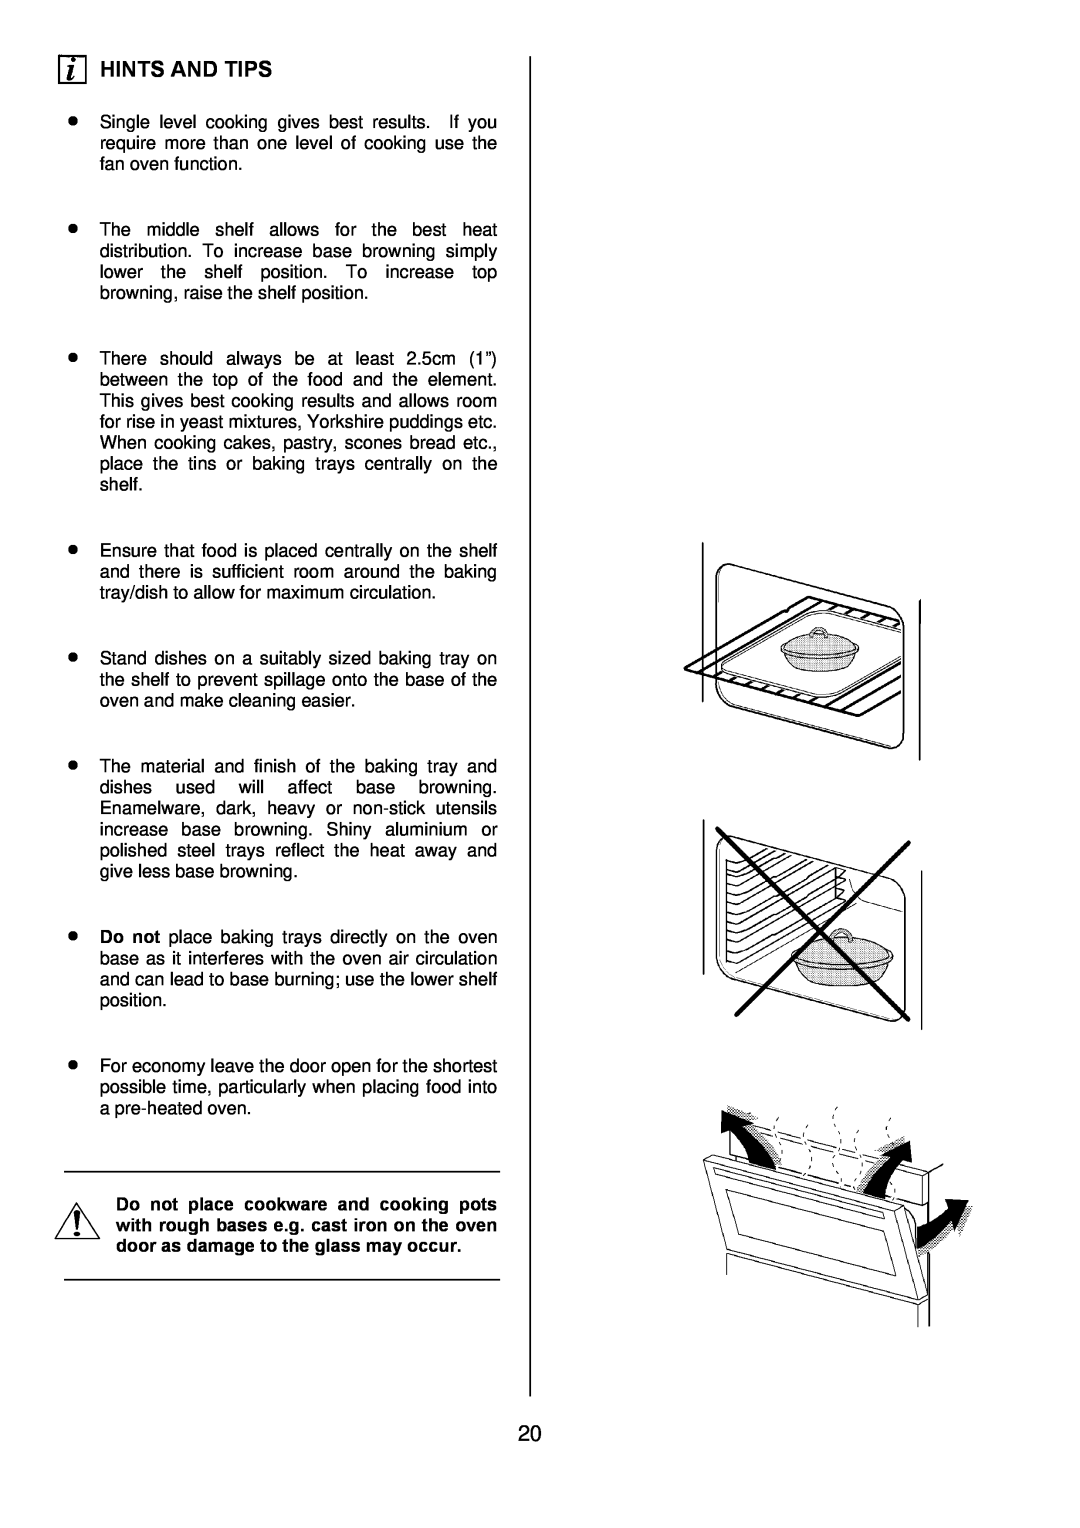 Electrolux D4101-5 manual Hints And Tips 